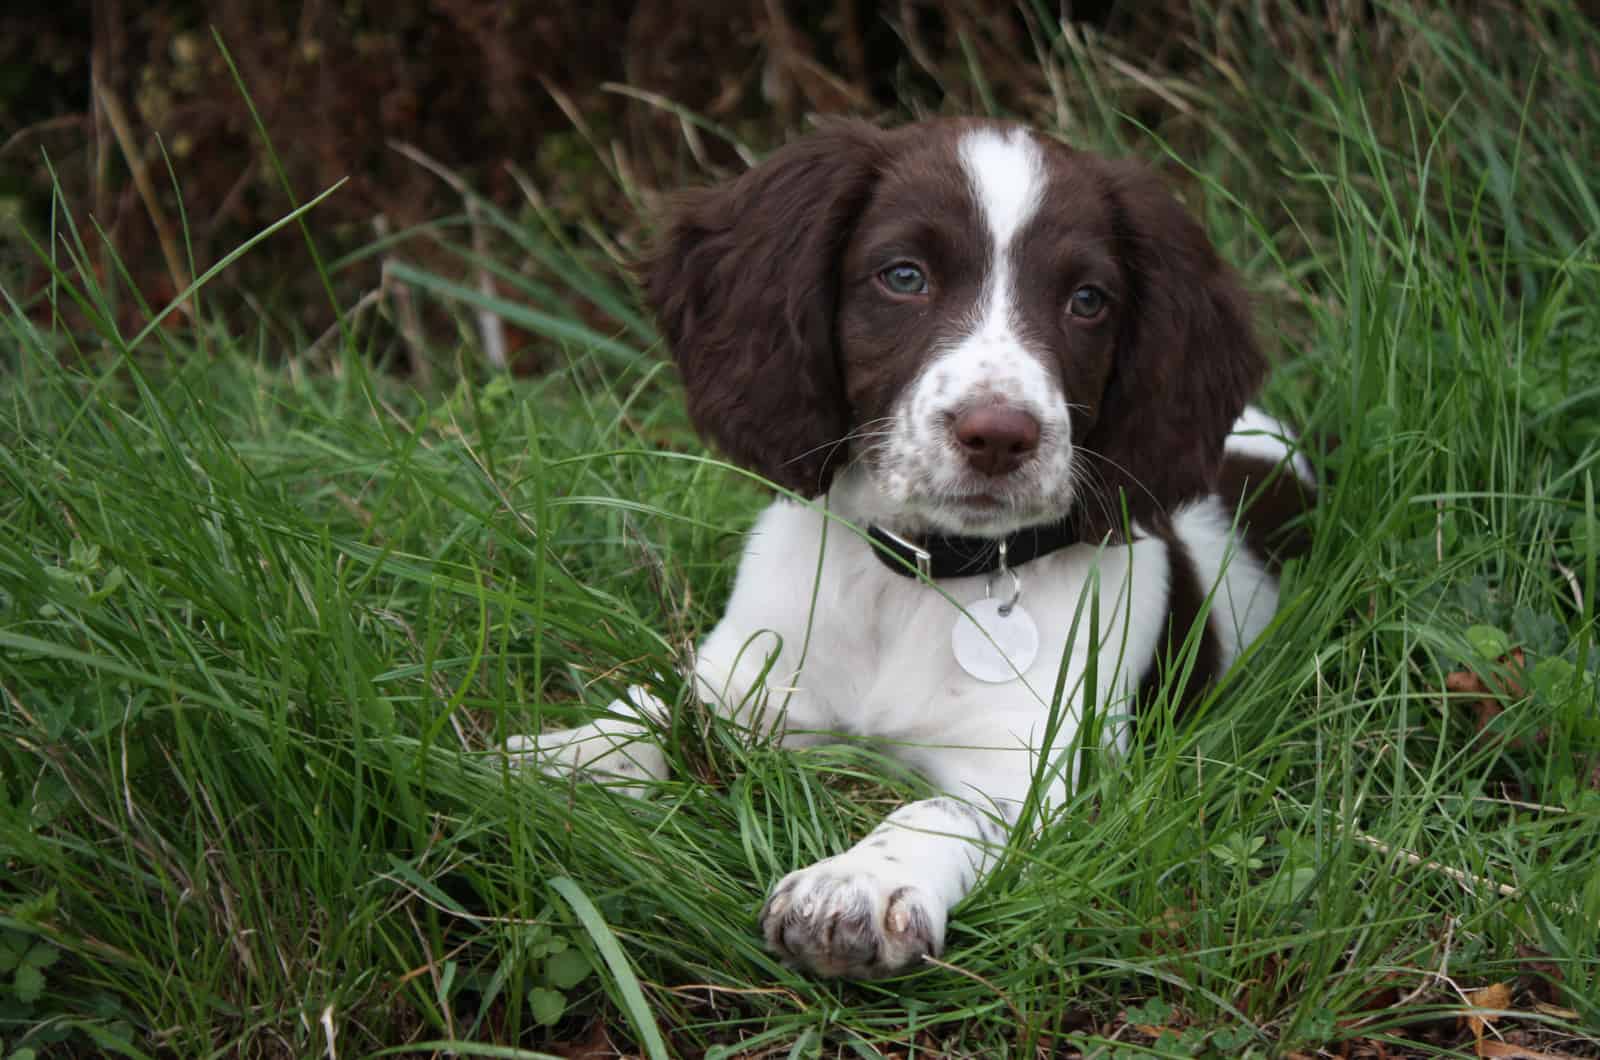 The English Springer Spaniel lies in the long green grass